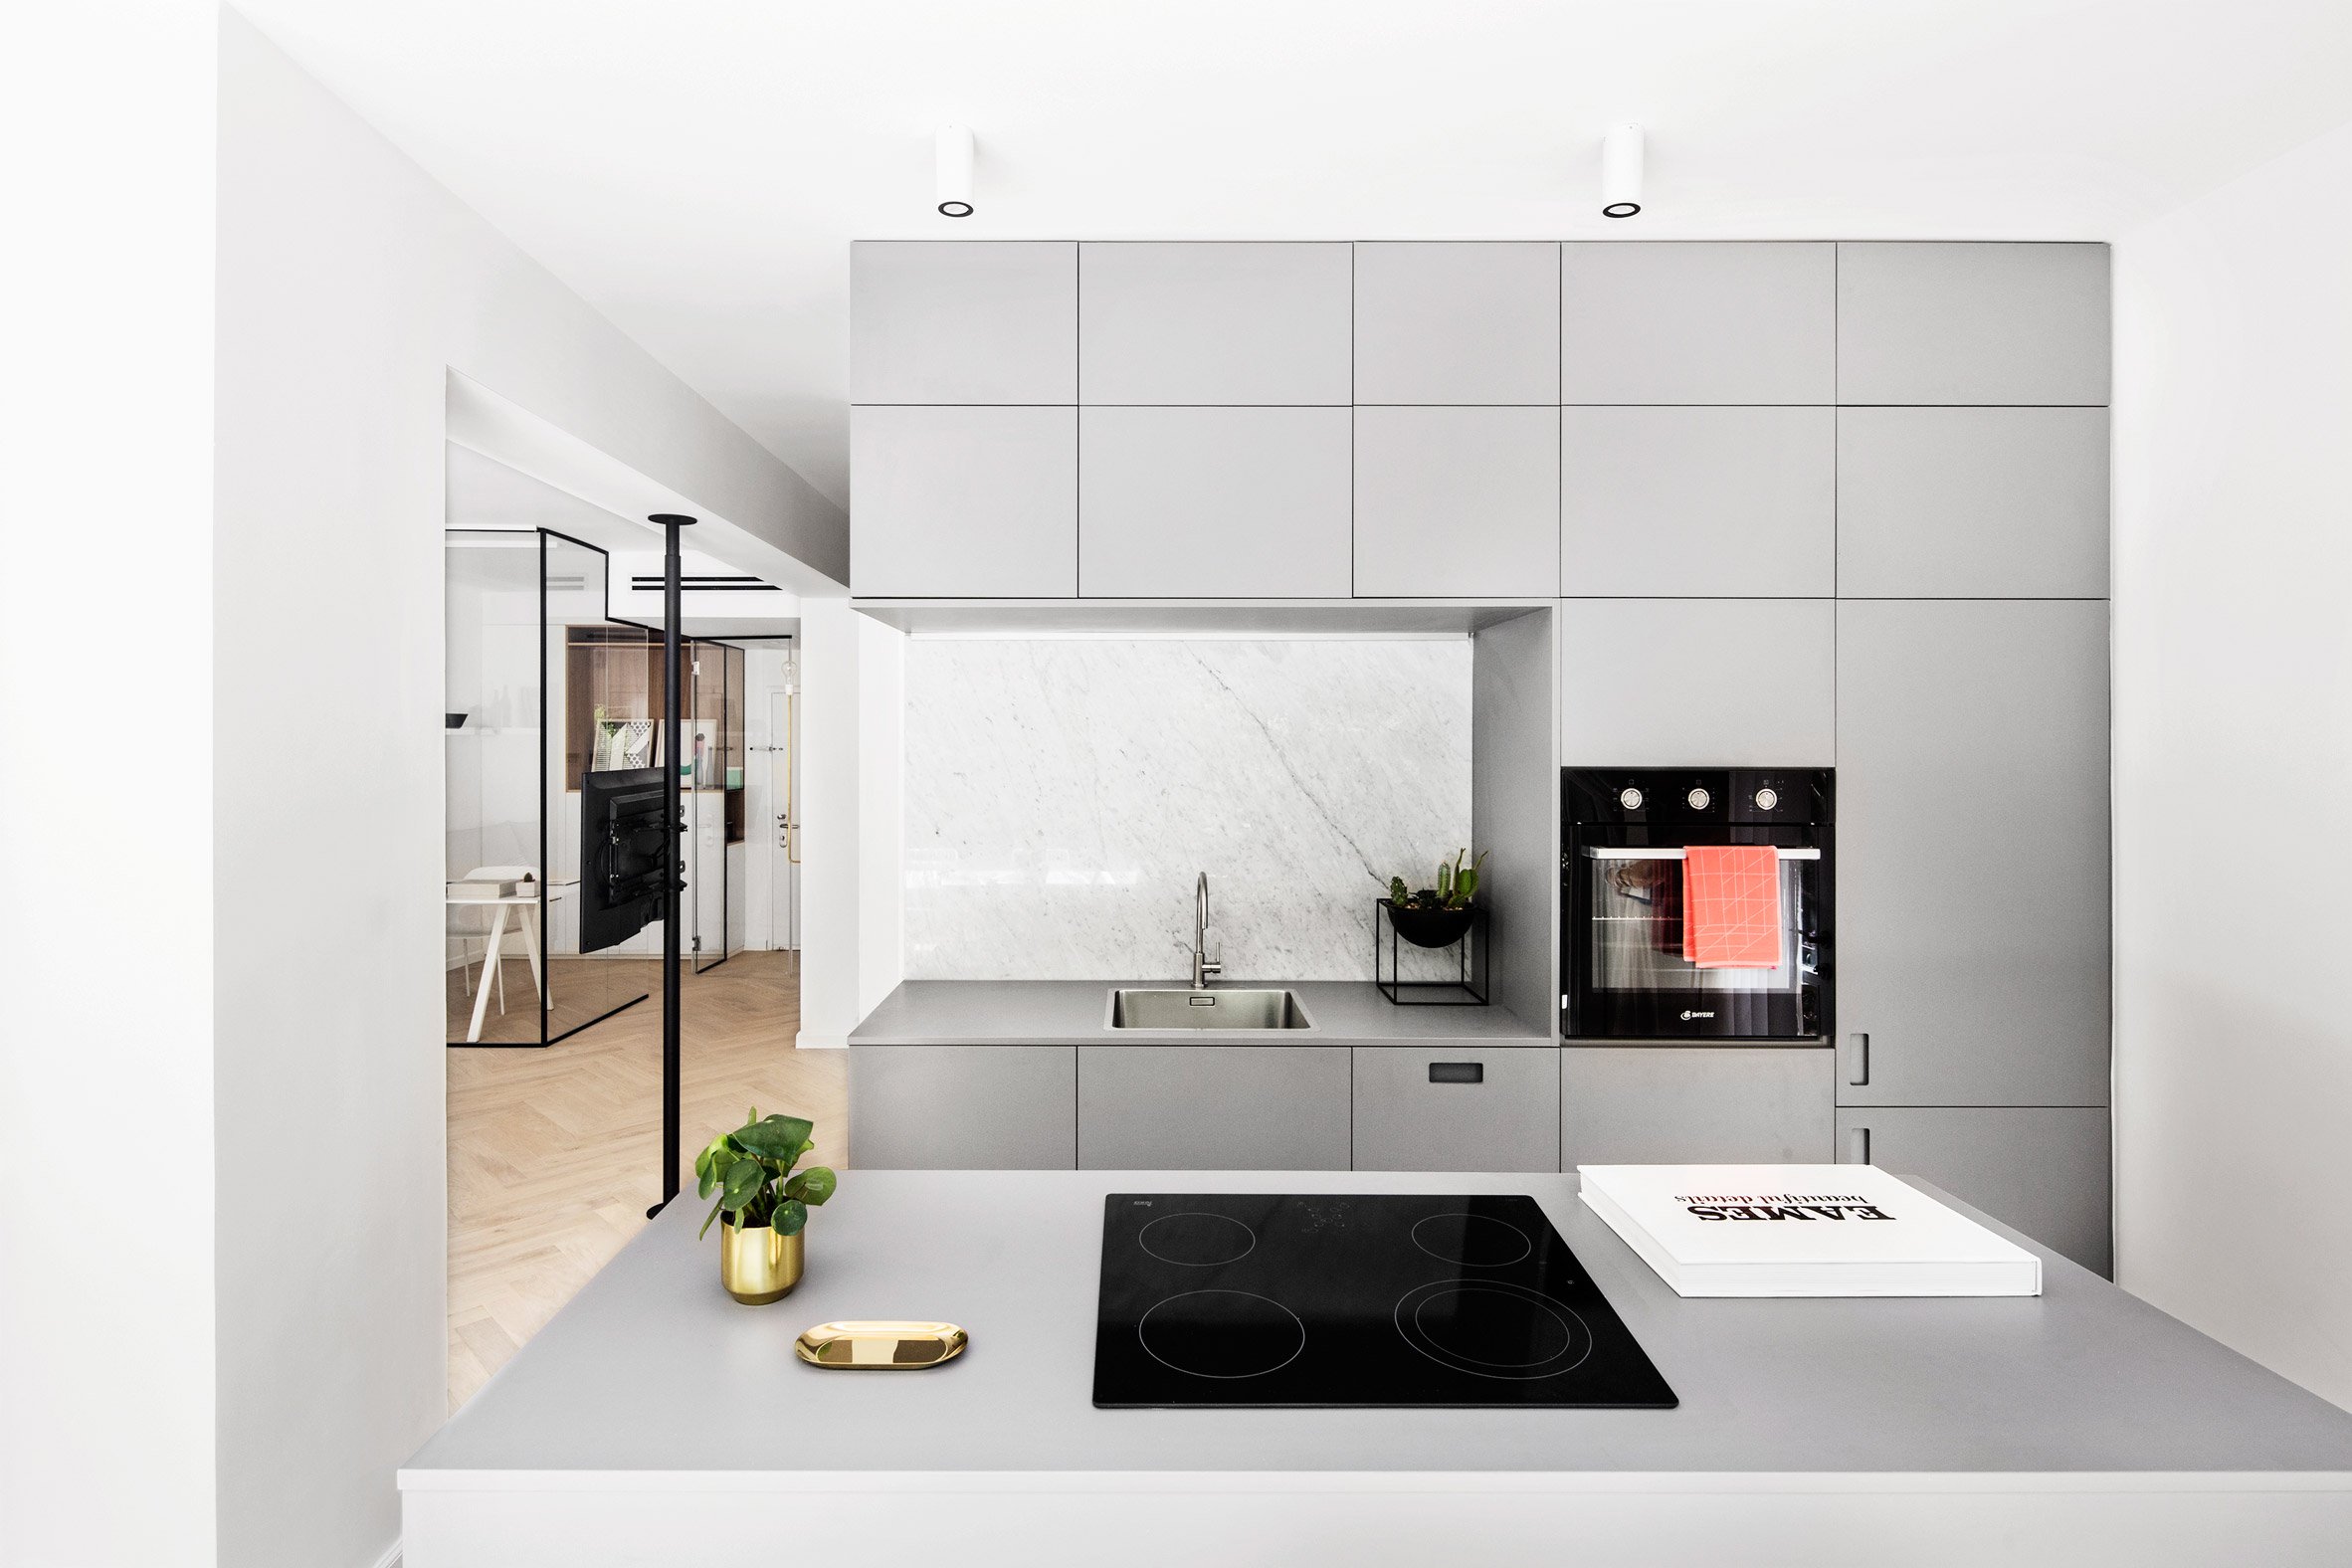 The kitchen is modern and minimalist, it's done in light grey with marble inserts and some brass touches for elegance